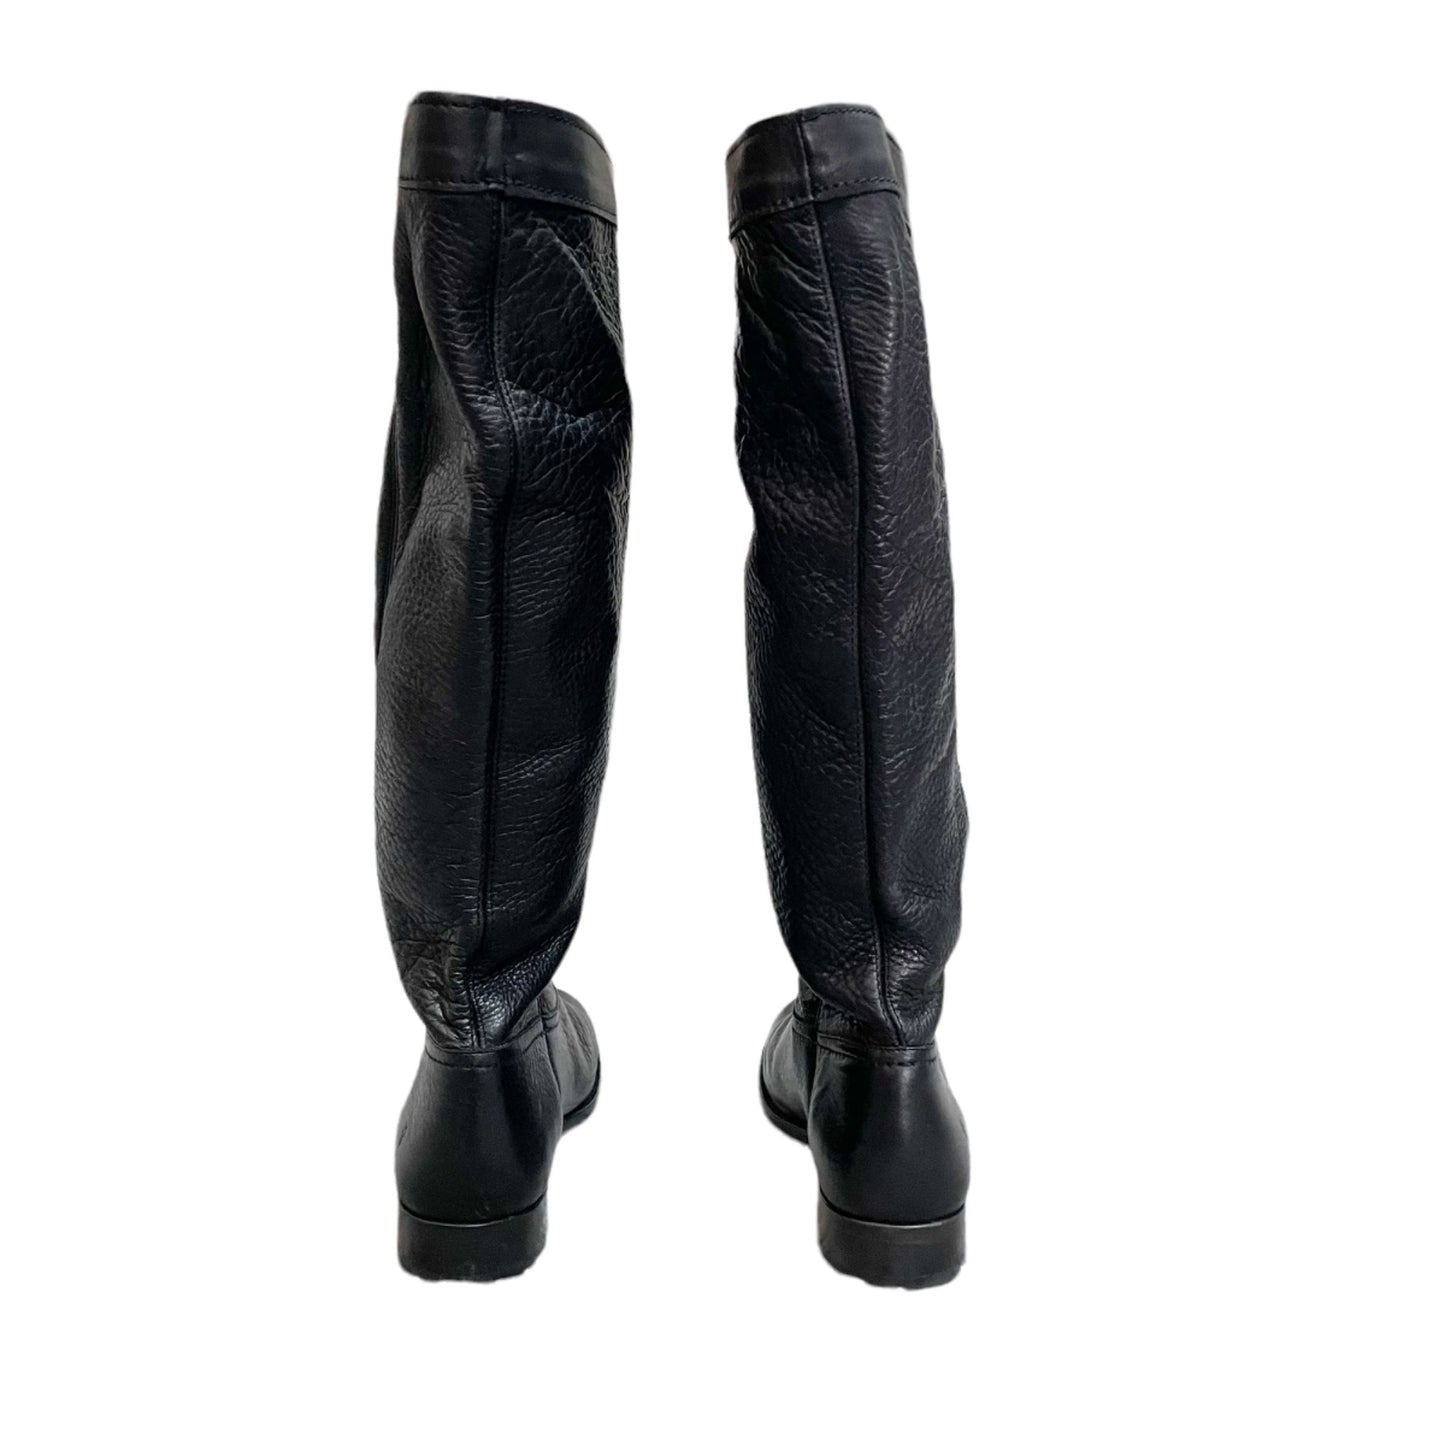 Frye Black Cora Roper Pebbled Leather Pull On Knee High Boots Women's Size 8